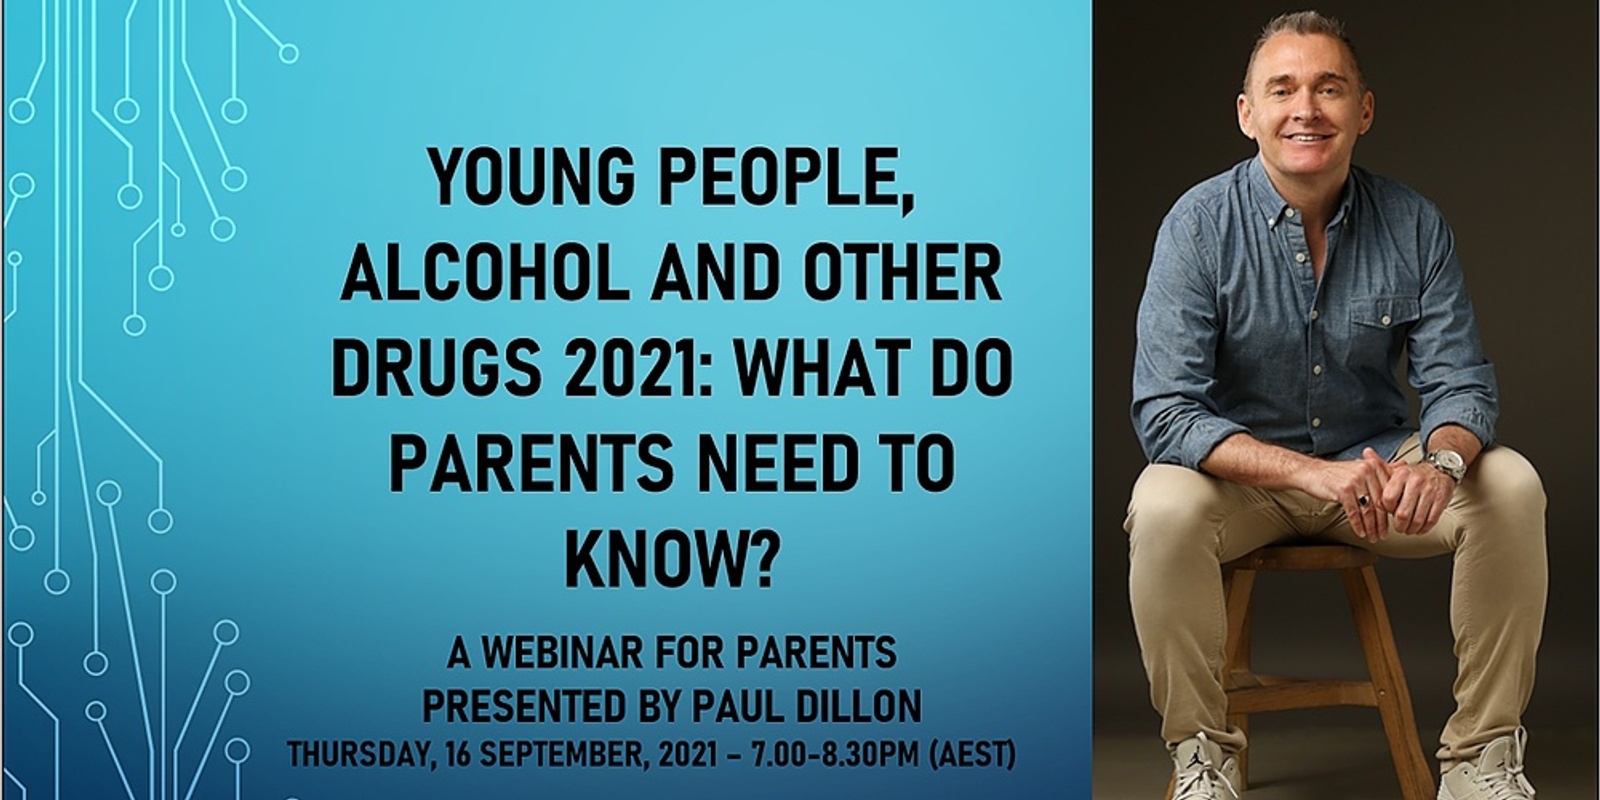 Young people, alcohol and other drugs 2021: What do parents need to know?